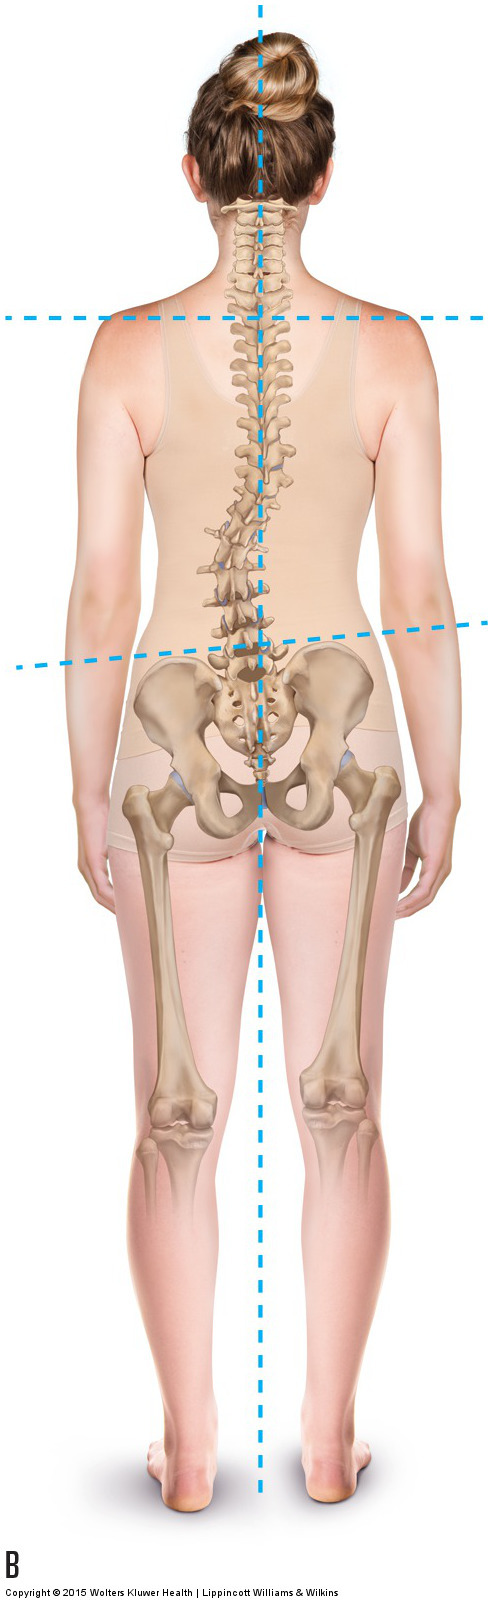 A dropped arch drops the iliac crest height on that side, resulting in a compensatory scoliosis.